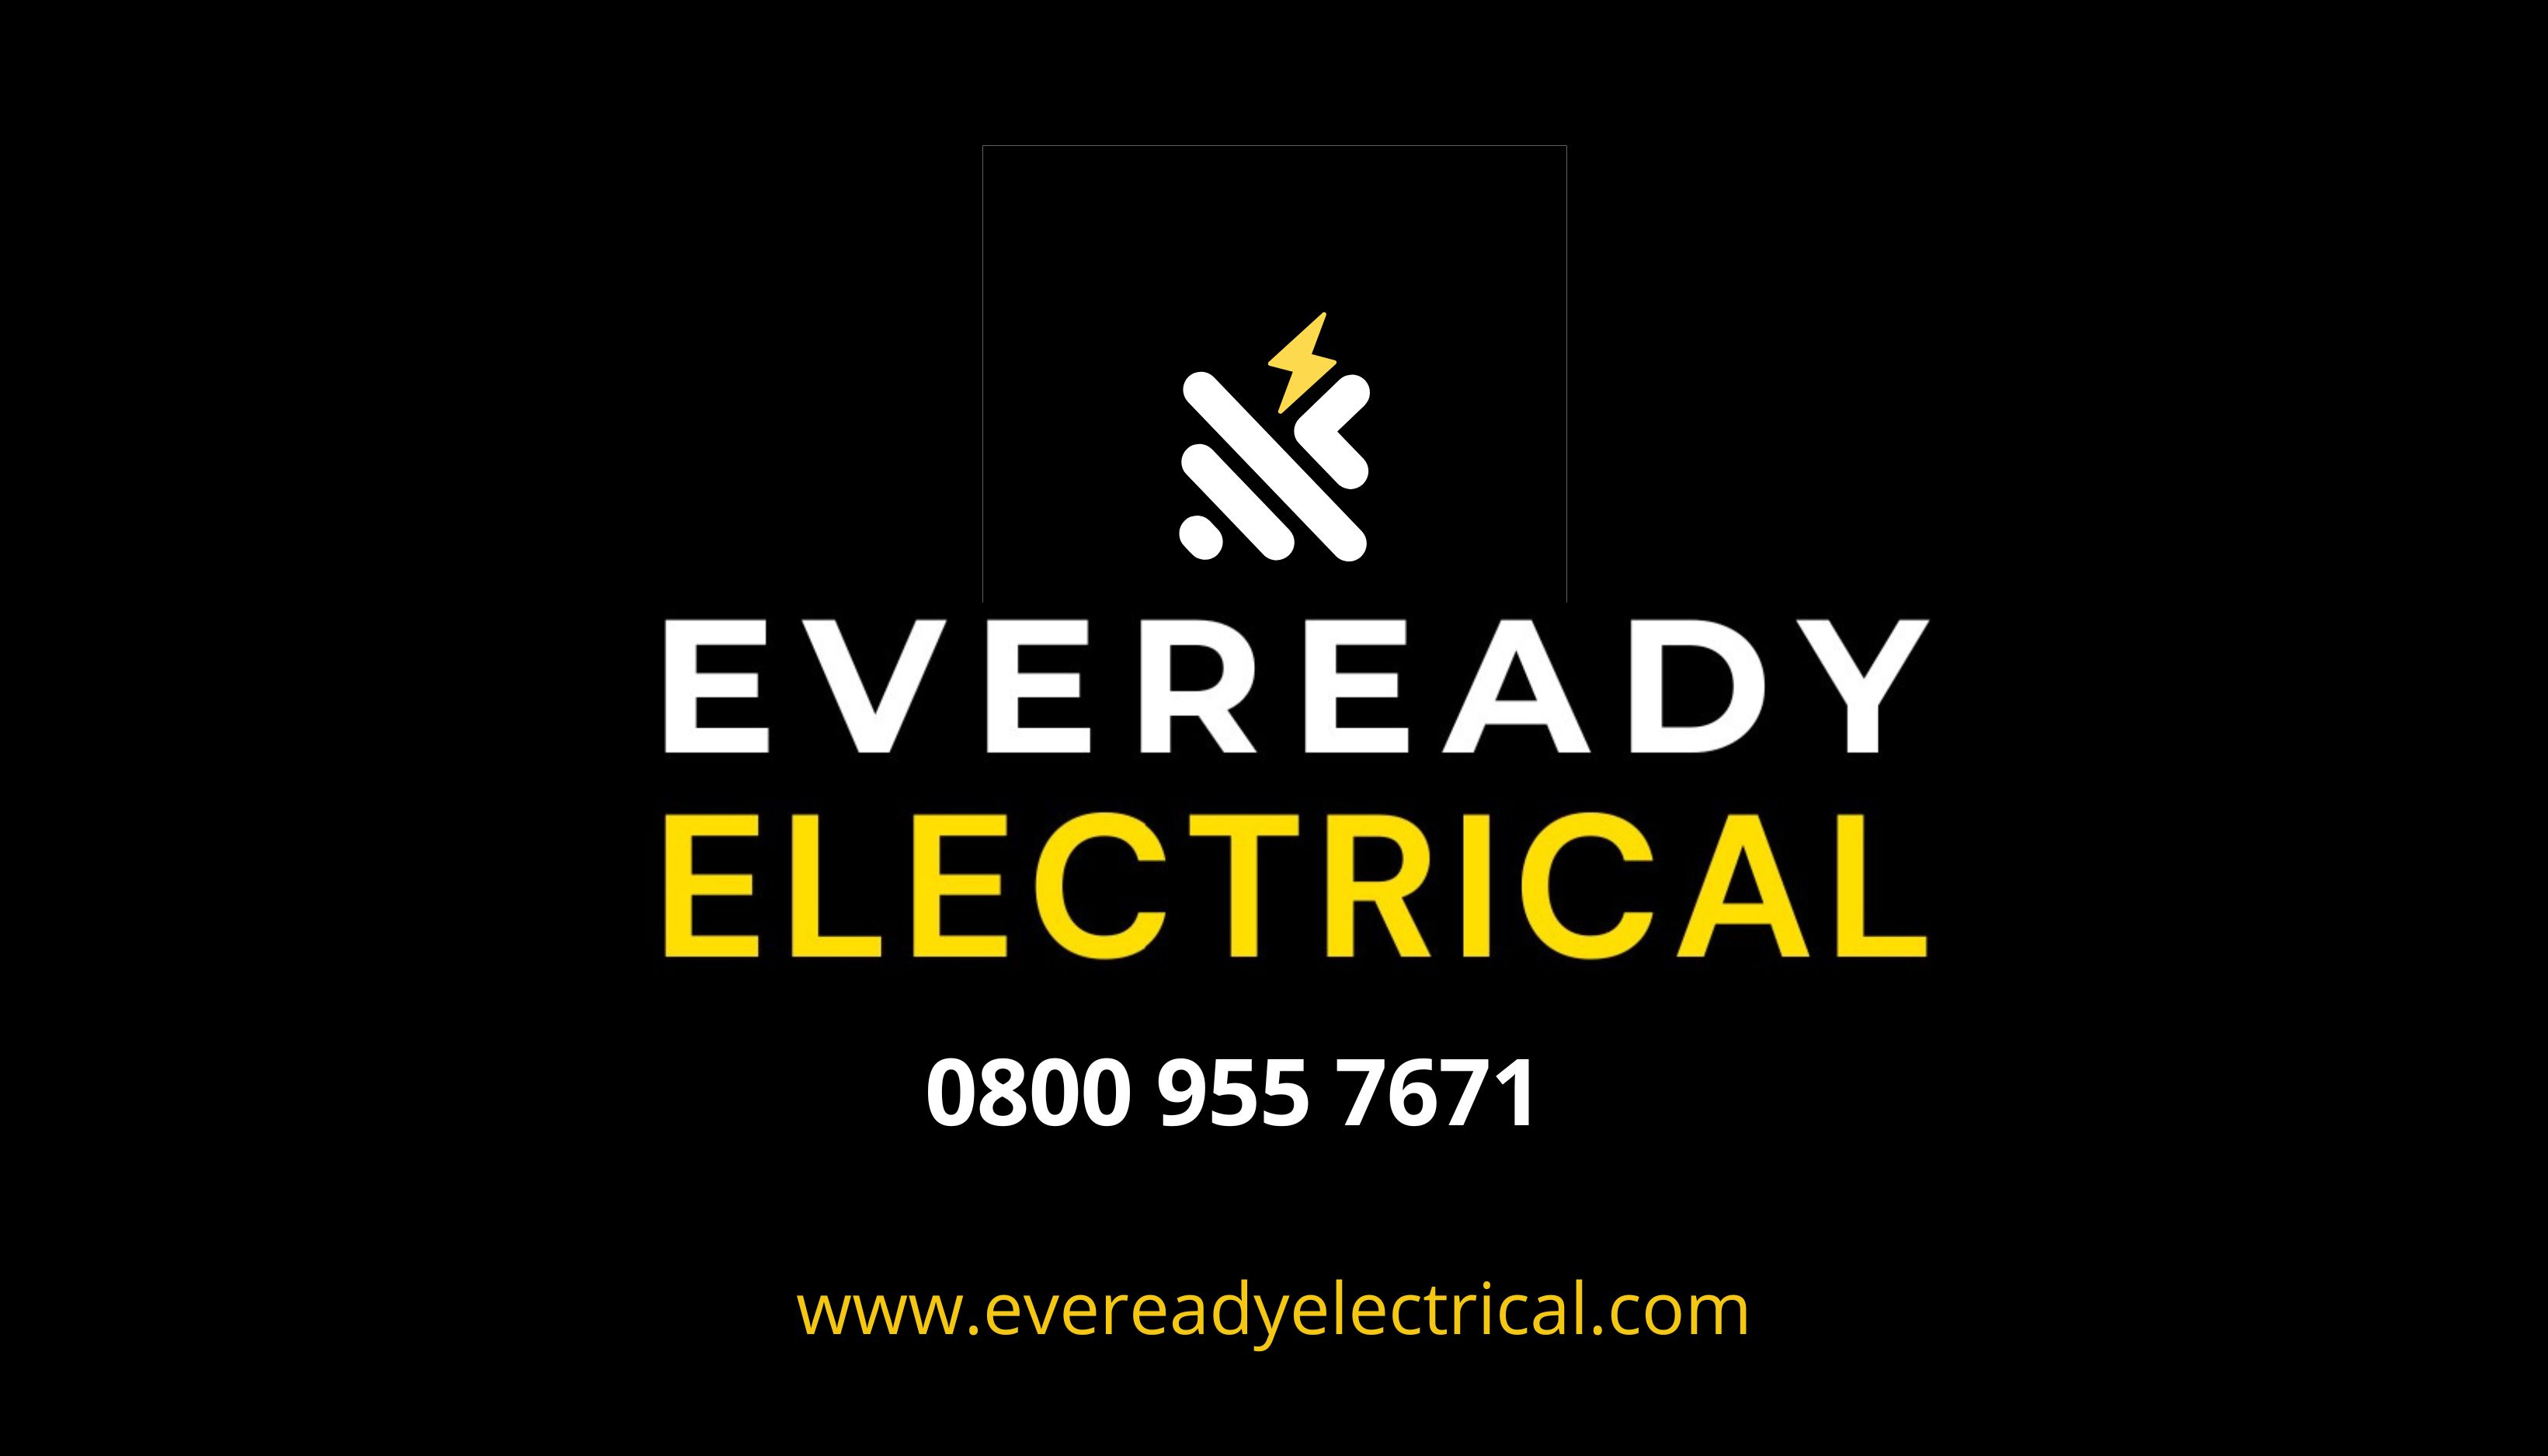 Logo of Eveready Electrical LTD Electricians And Electrical Contractors In Dover, Kent